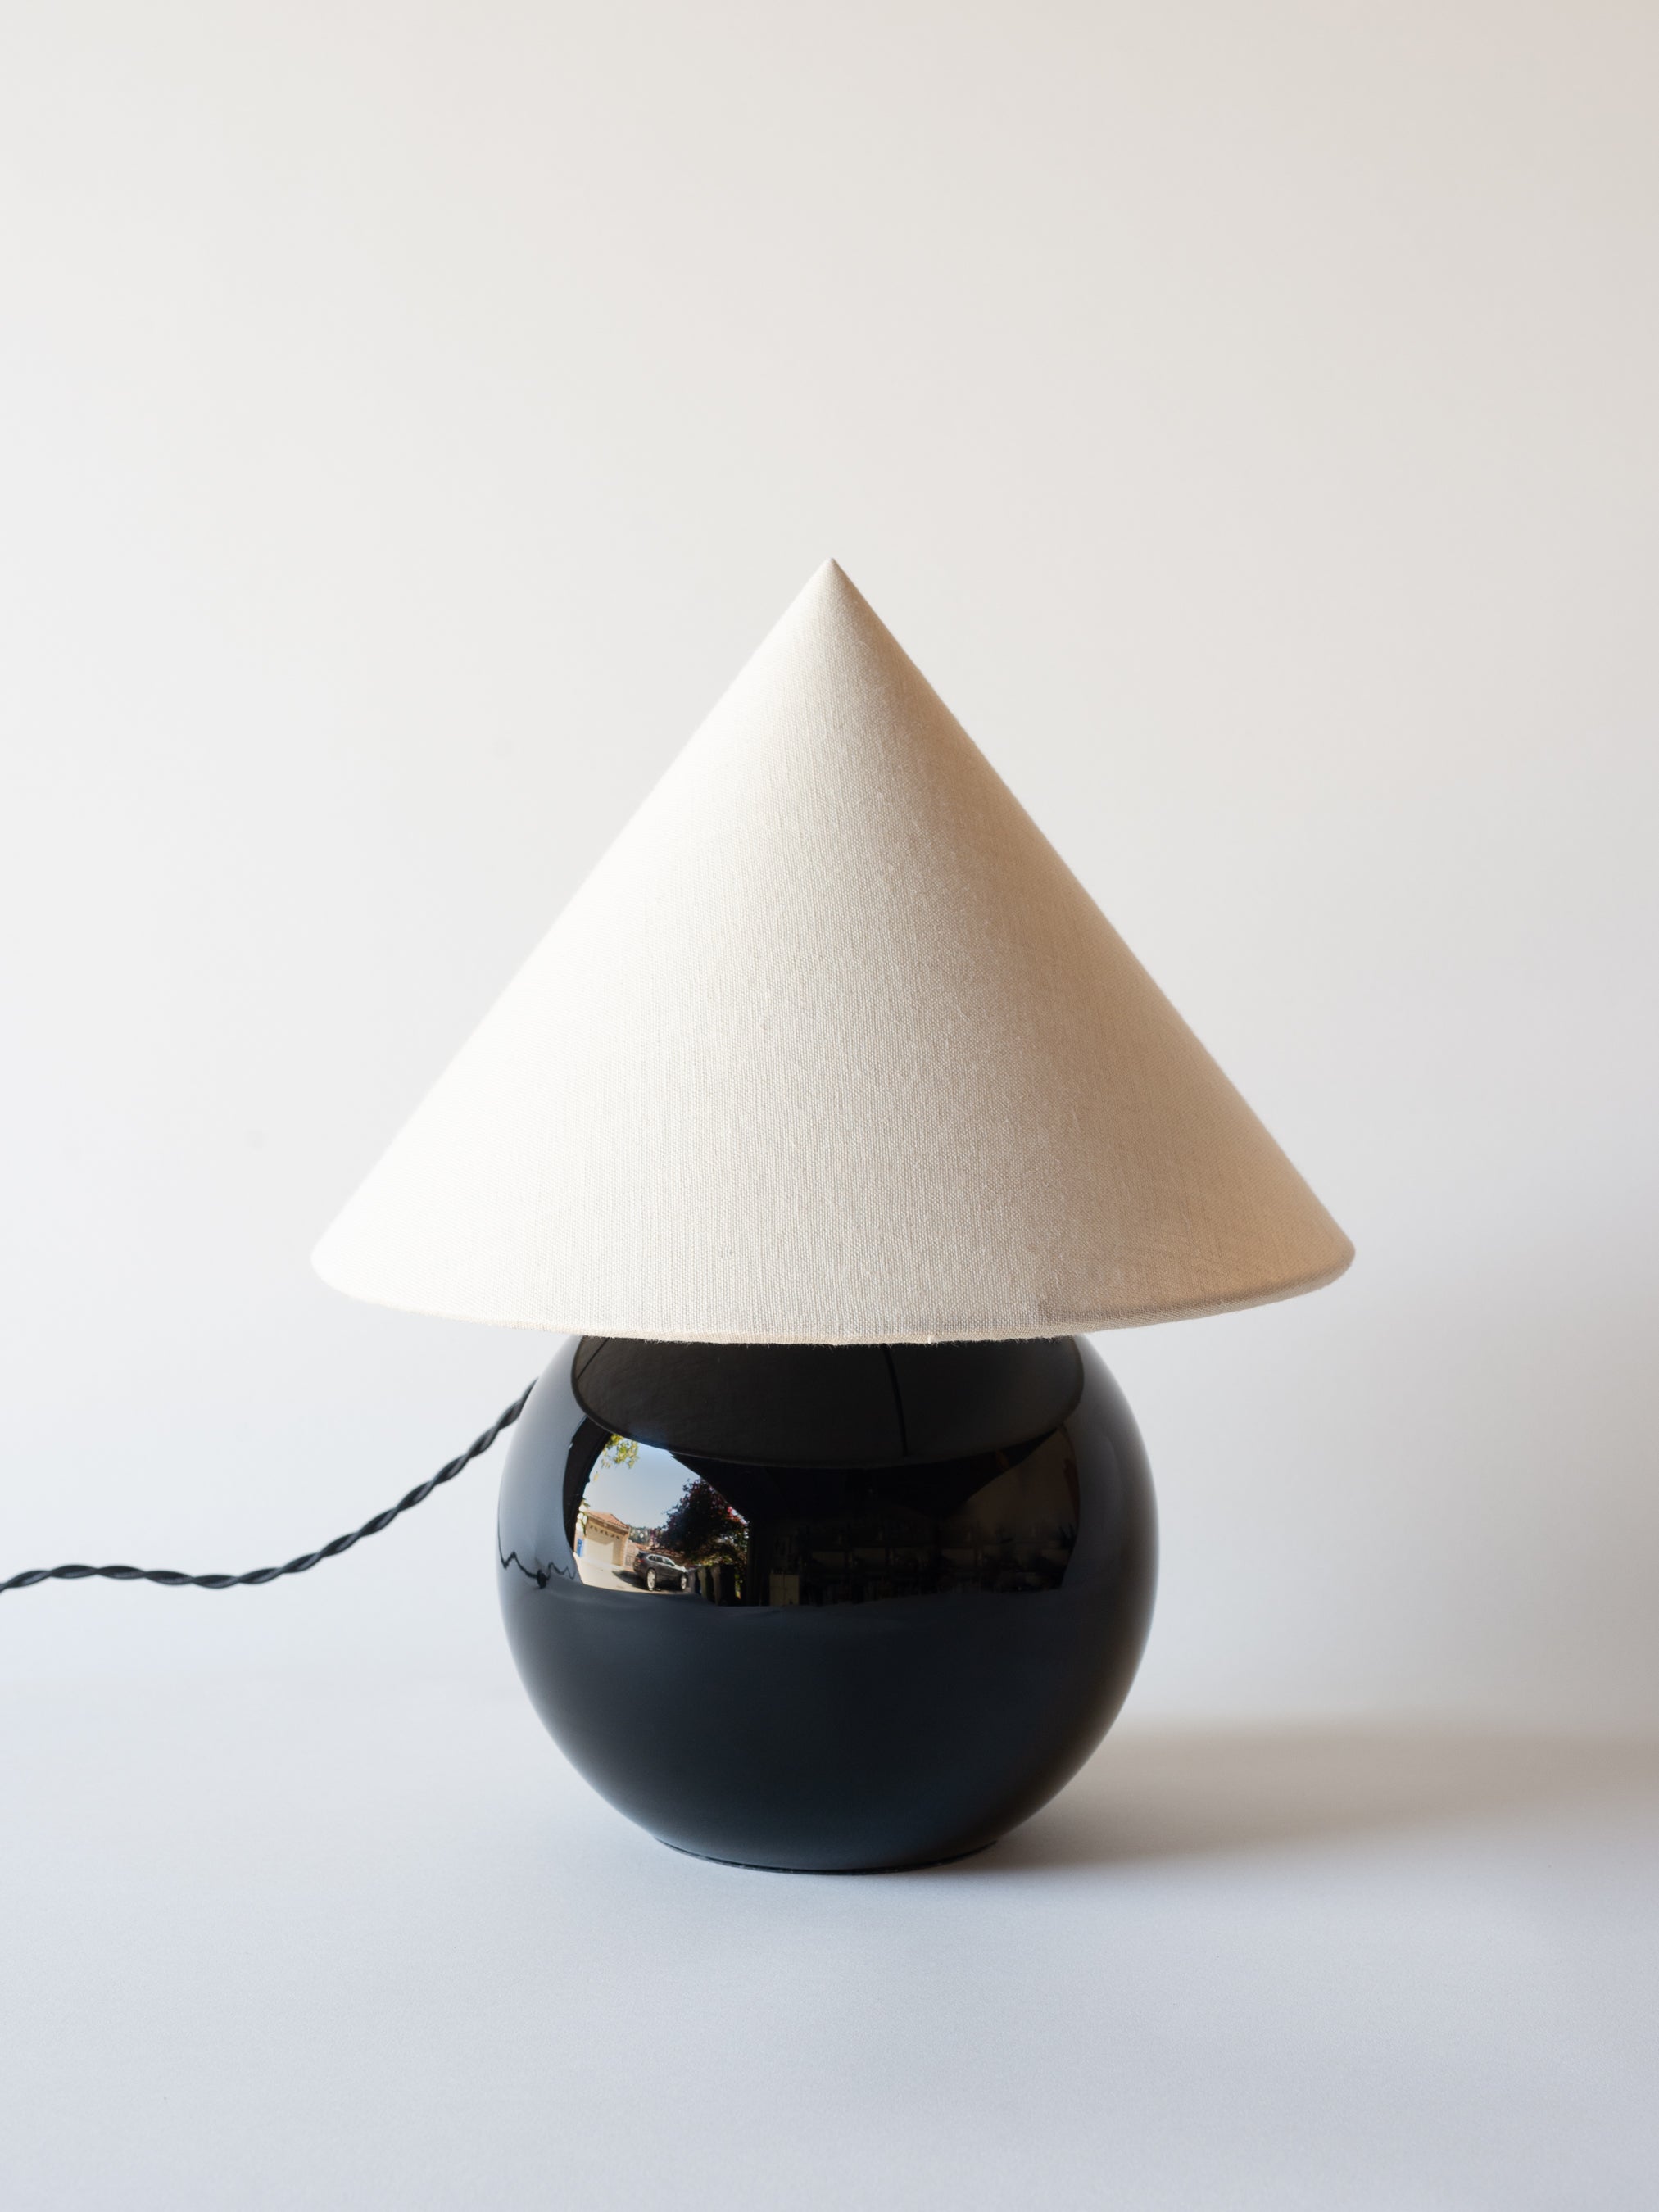 A spherical black glass table lamp by Jacques Adnet circa 1940. Rewired for US outlets and fitted with a custom white linen shade with stitched black suede edge detail. 


